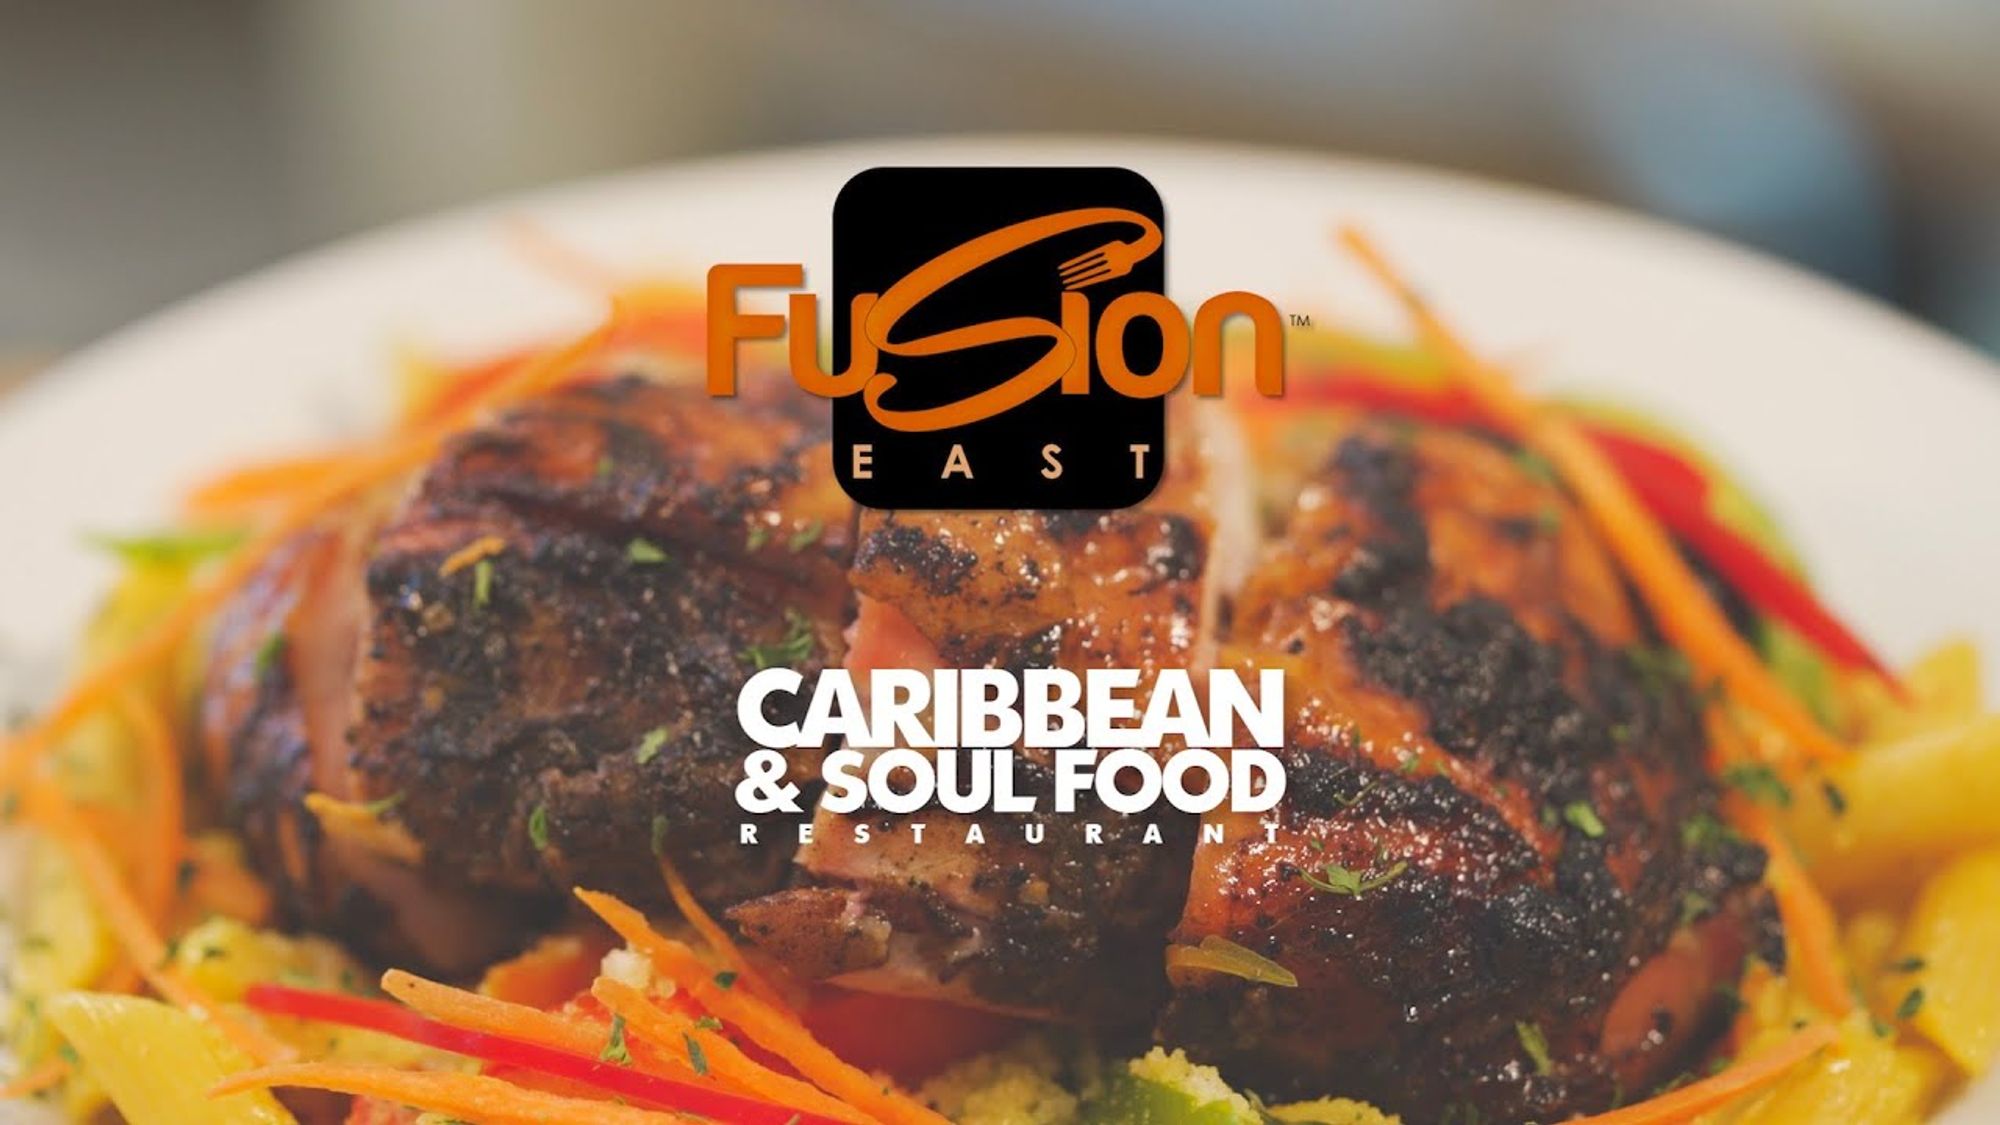 Fusion East Restaurant Commercial